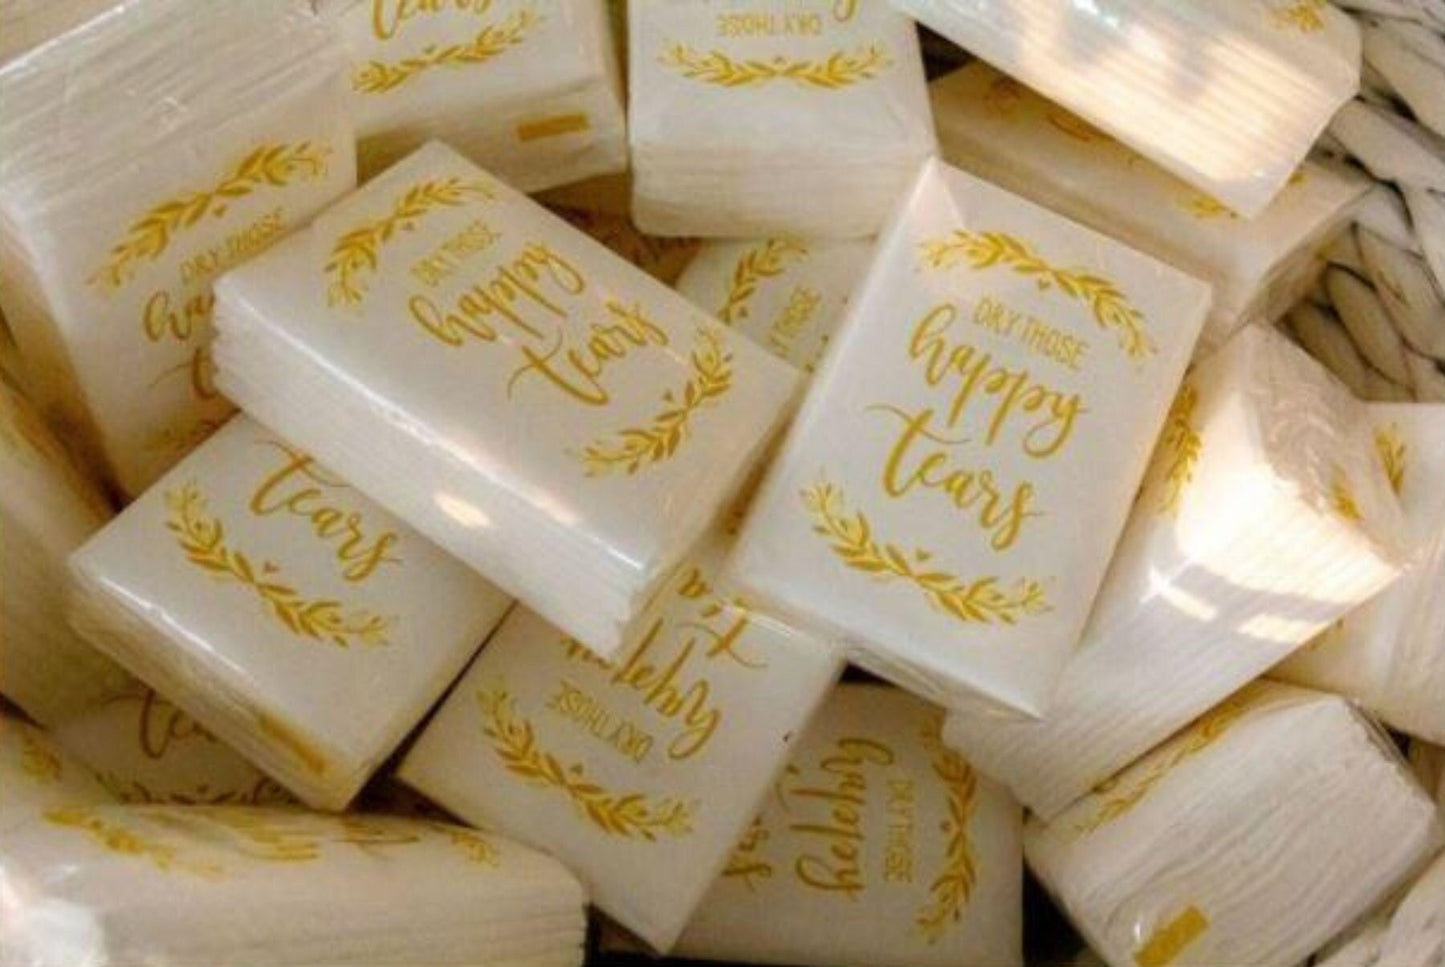 Wedding Tissues Packs for Guests Dry Those Happy Tears